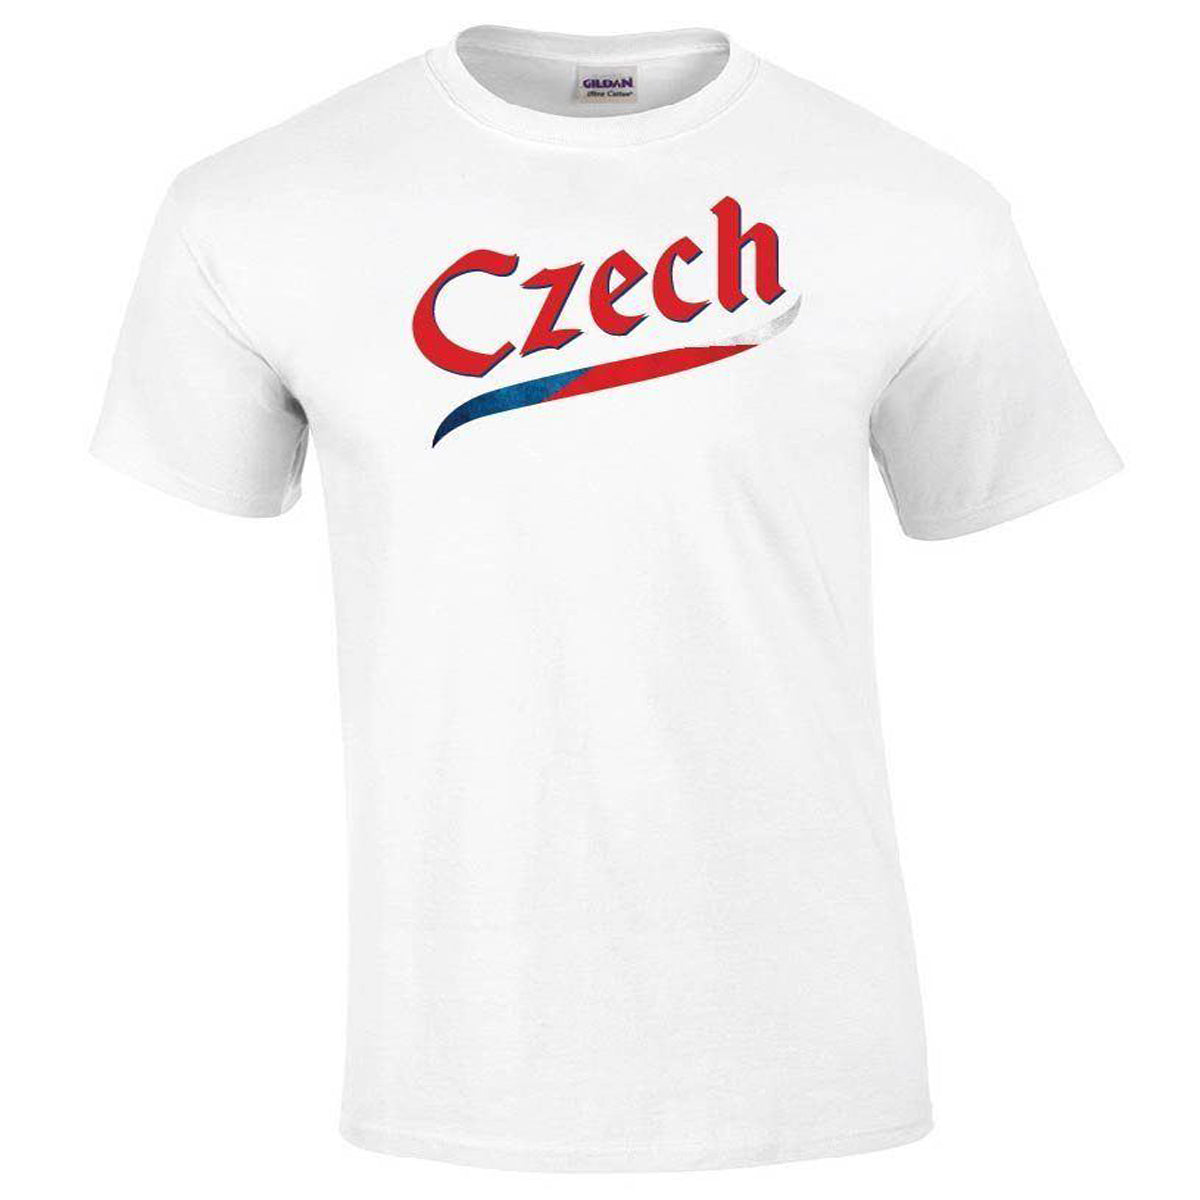 Czech Republic Script World Cup 2022 Printed Tee T-shirts 411 Youth Medium White Youth